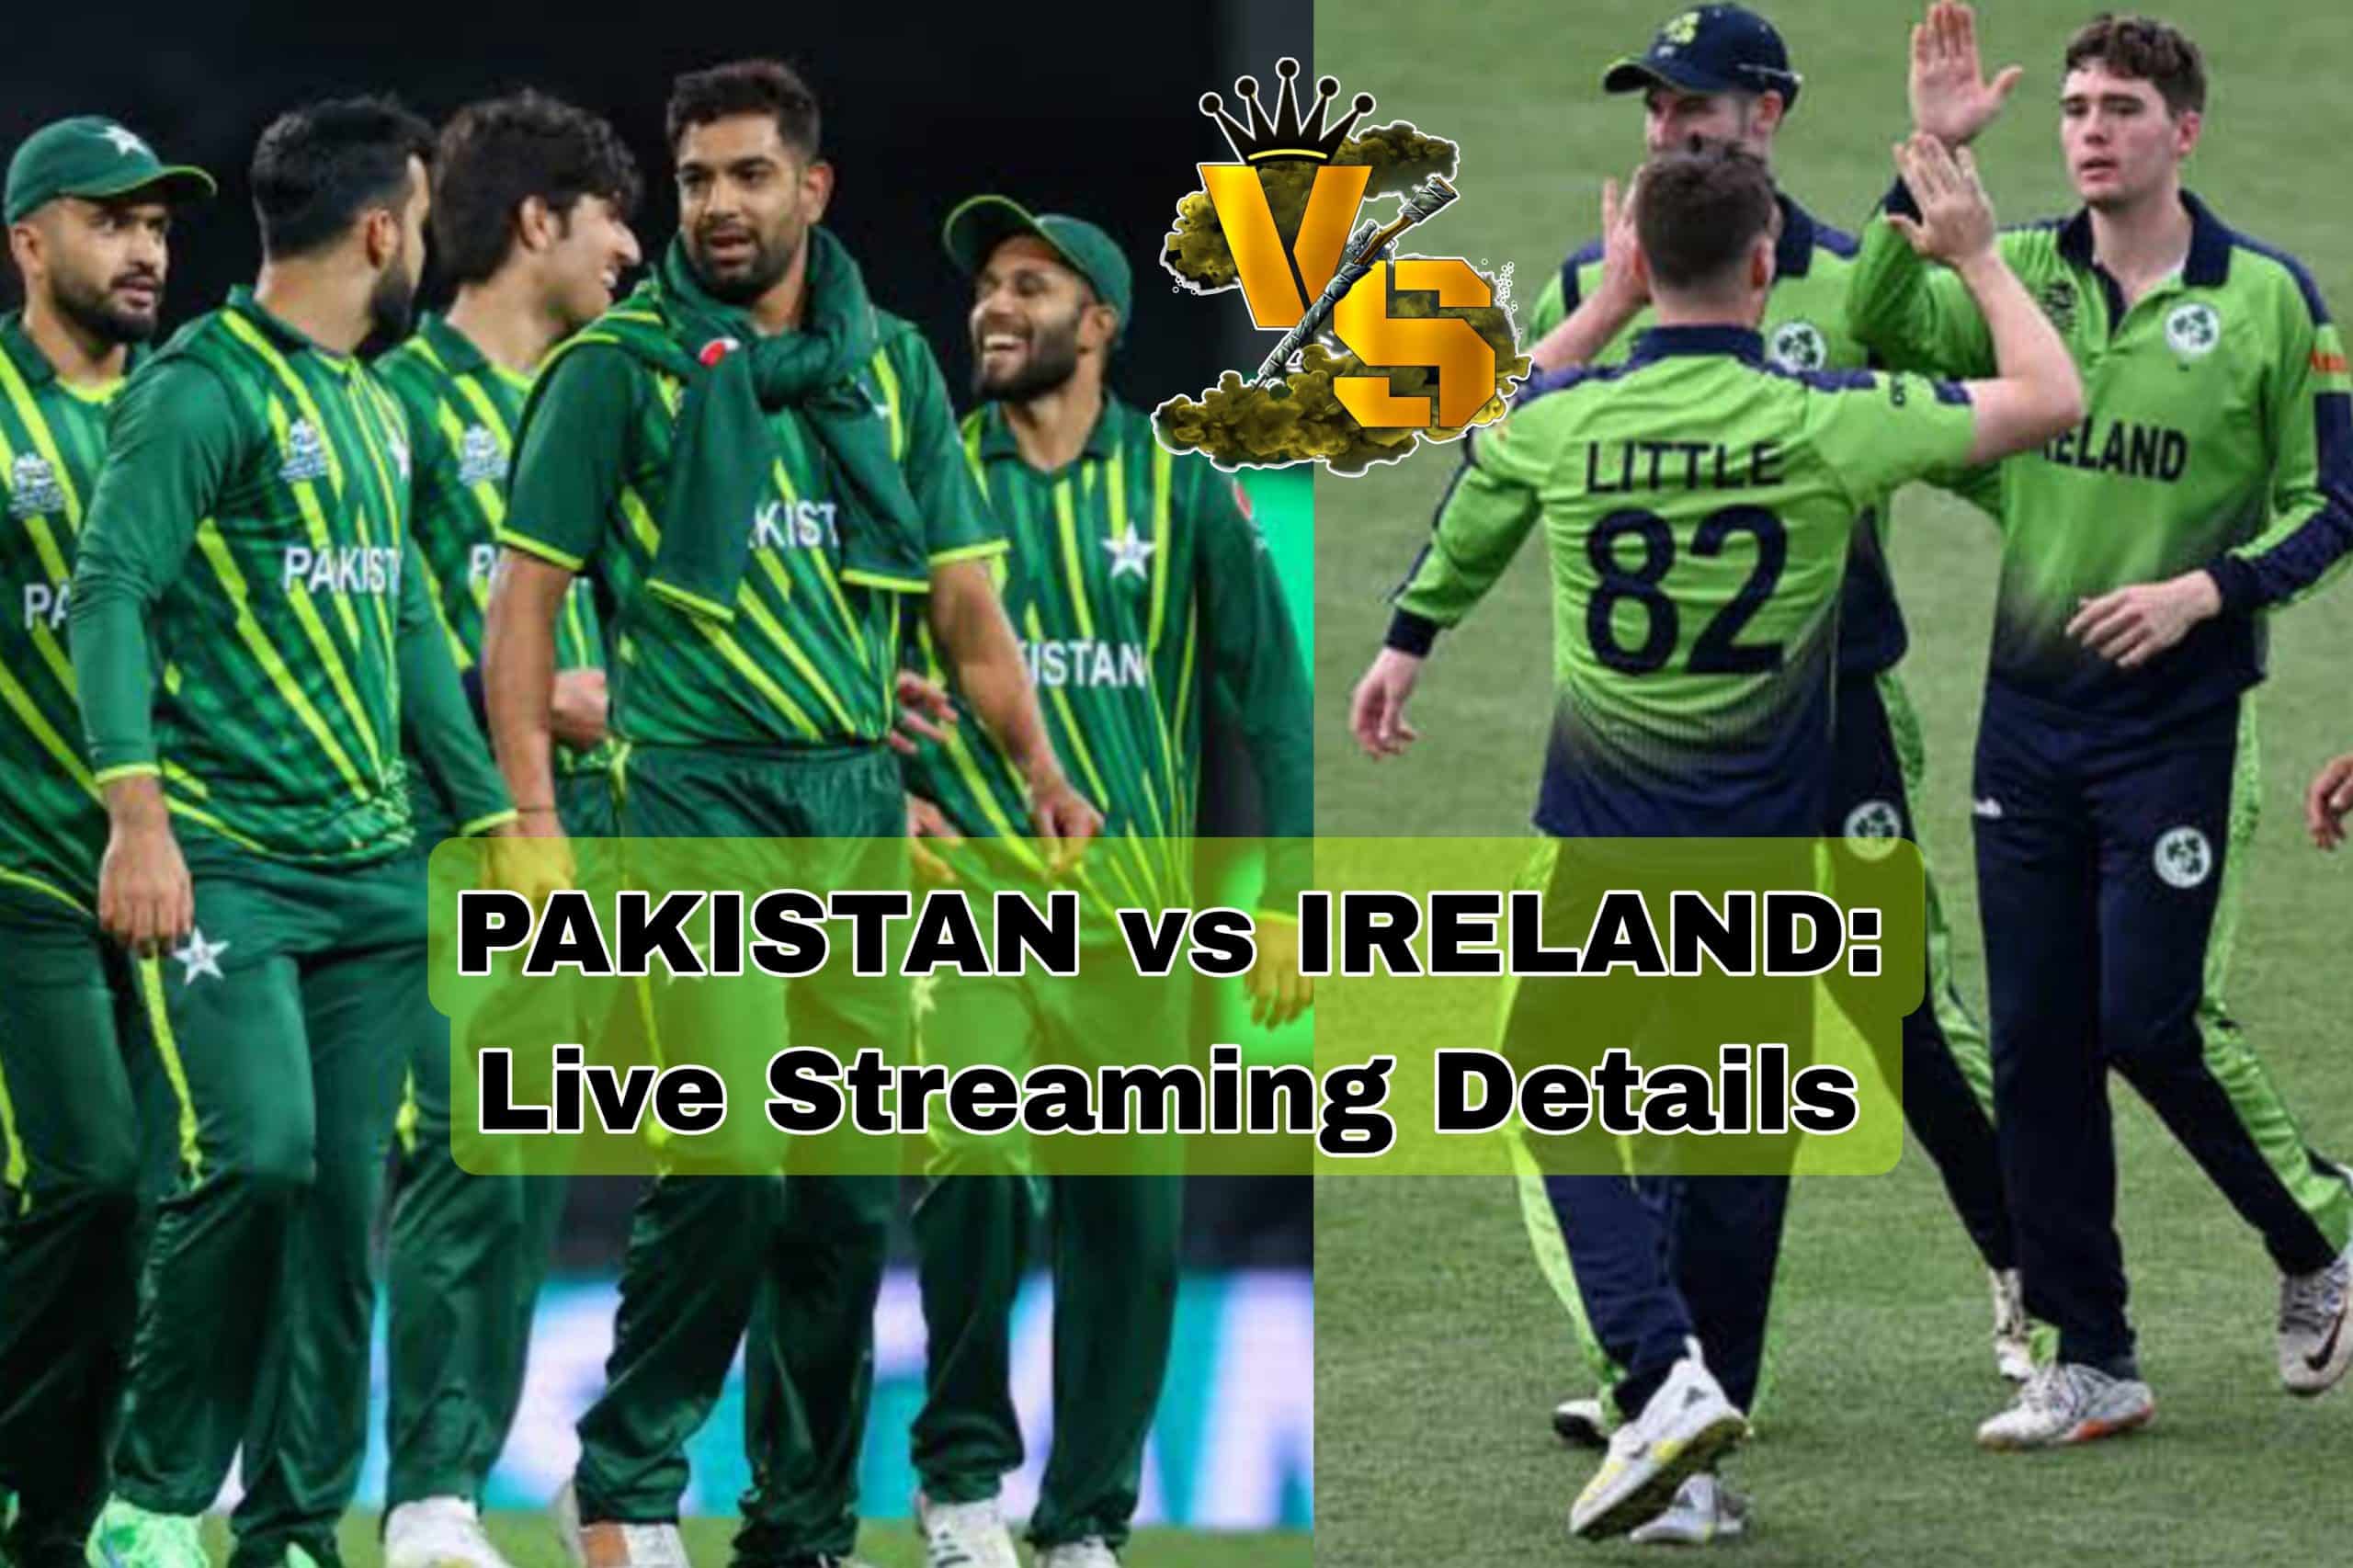 PAK vs IRE Live Streaming Details: Where to watch the Pakistan vs Ireland series in India?